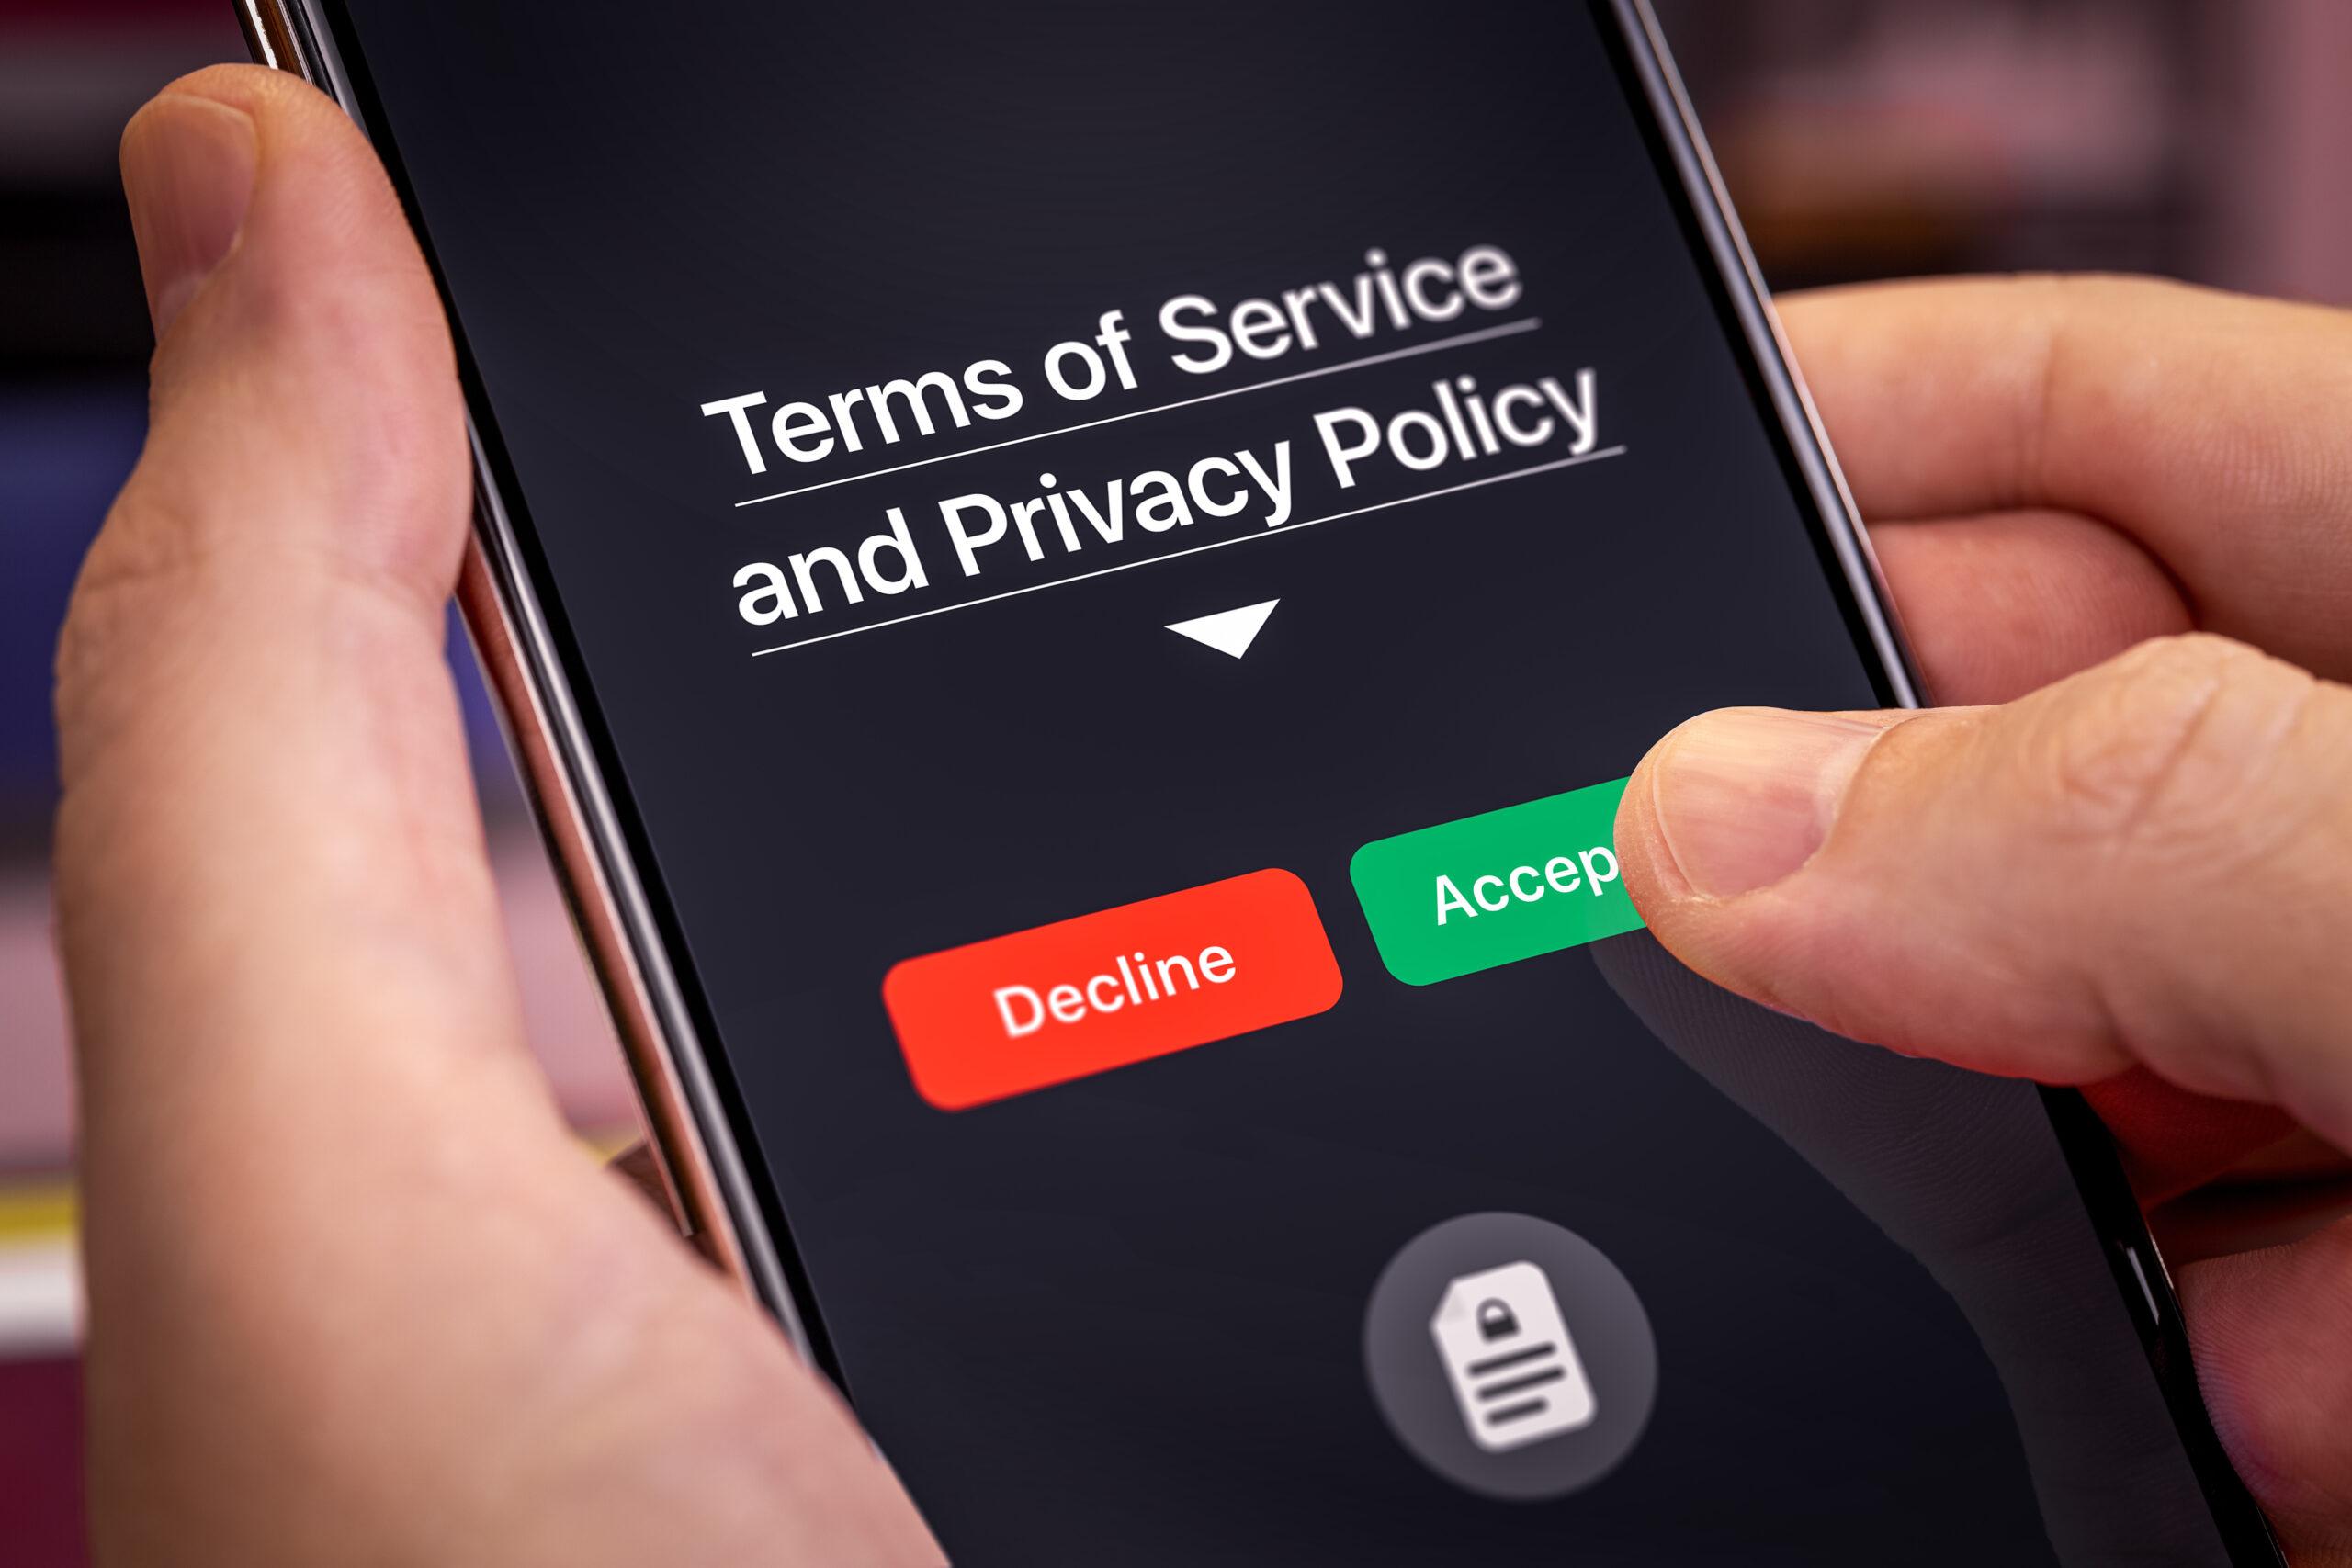 Smartphone user agrees to accept Terms of Service and Privacy Policy mobile app. Finger touches the Accept button. Dark app interface with Accept and Decline buttons.